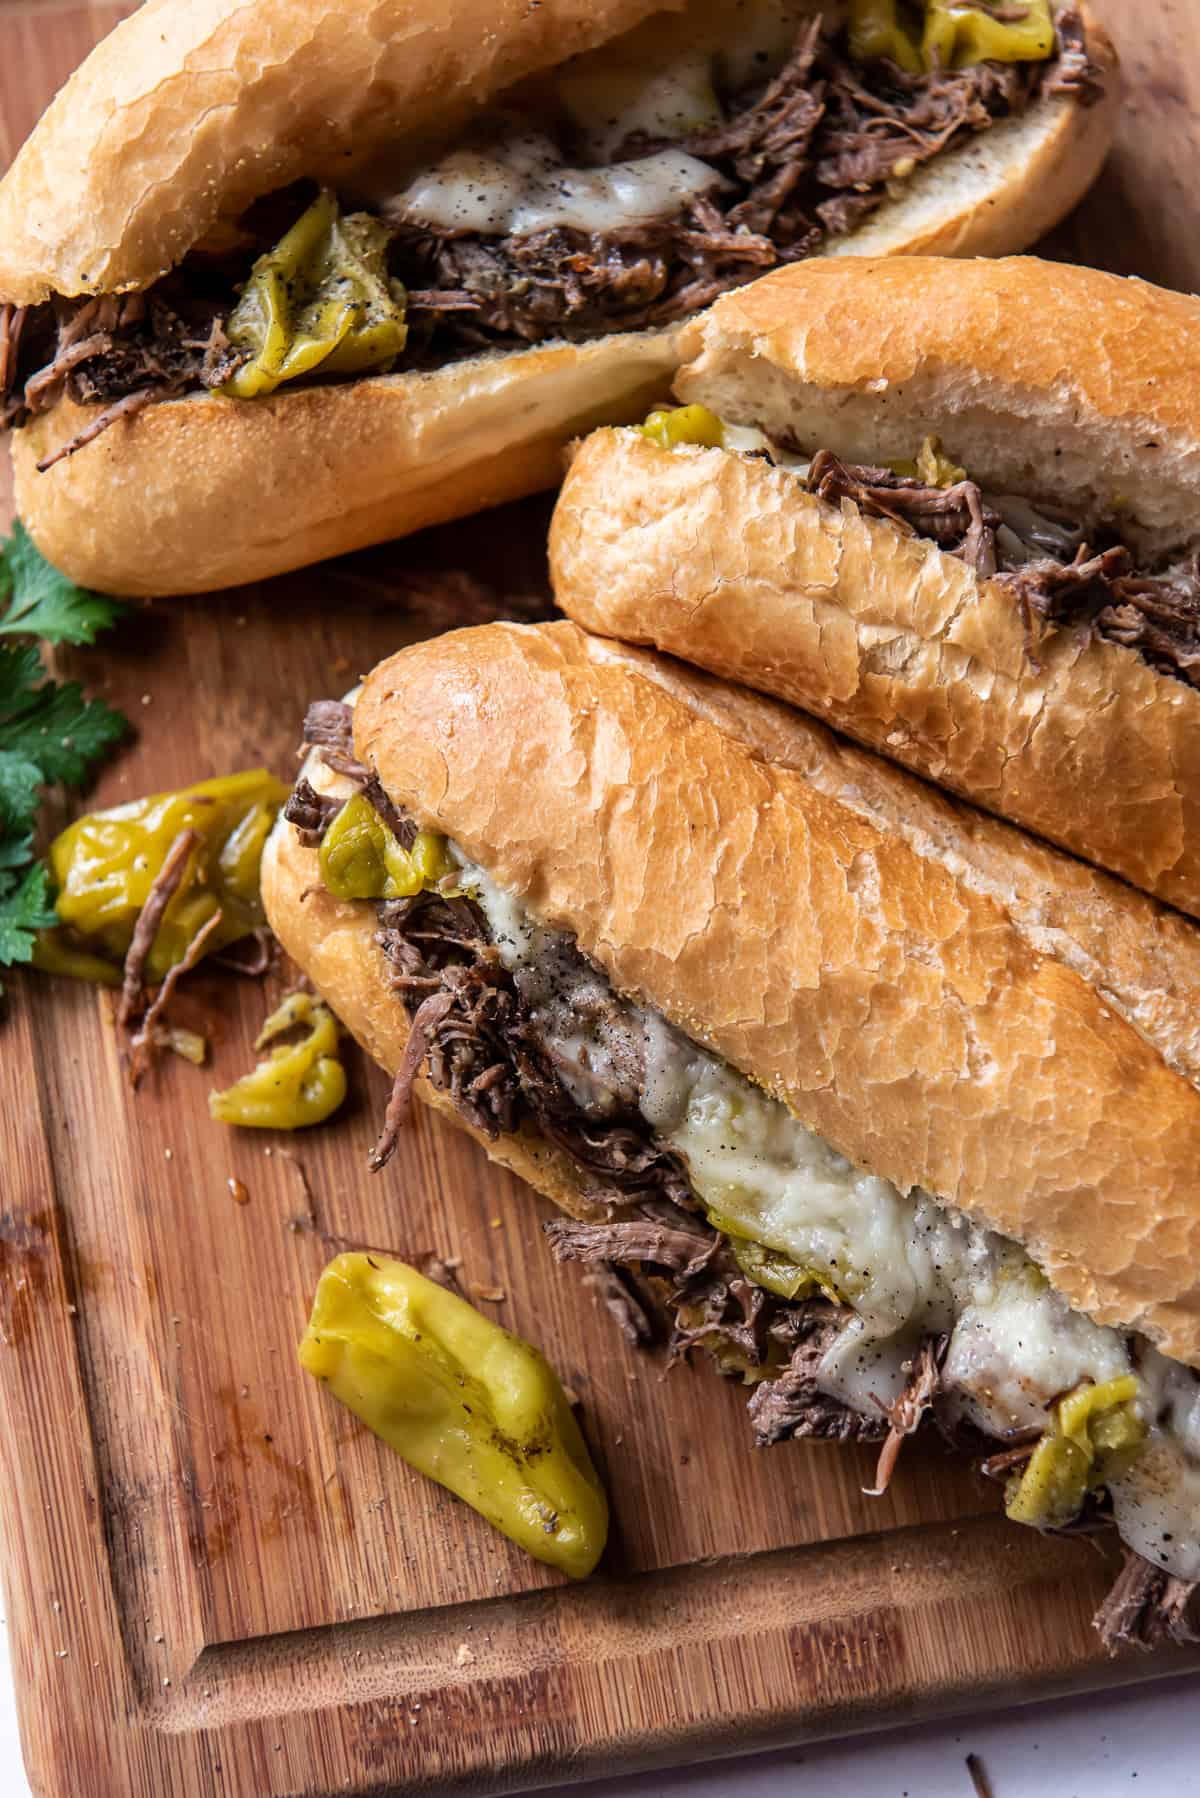 Italian Beef Sandwiches on rolls with melted provolone cheese and pepperoncini.